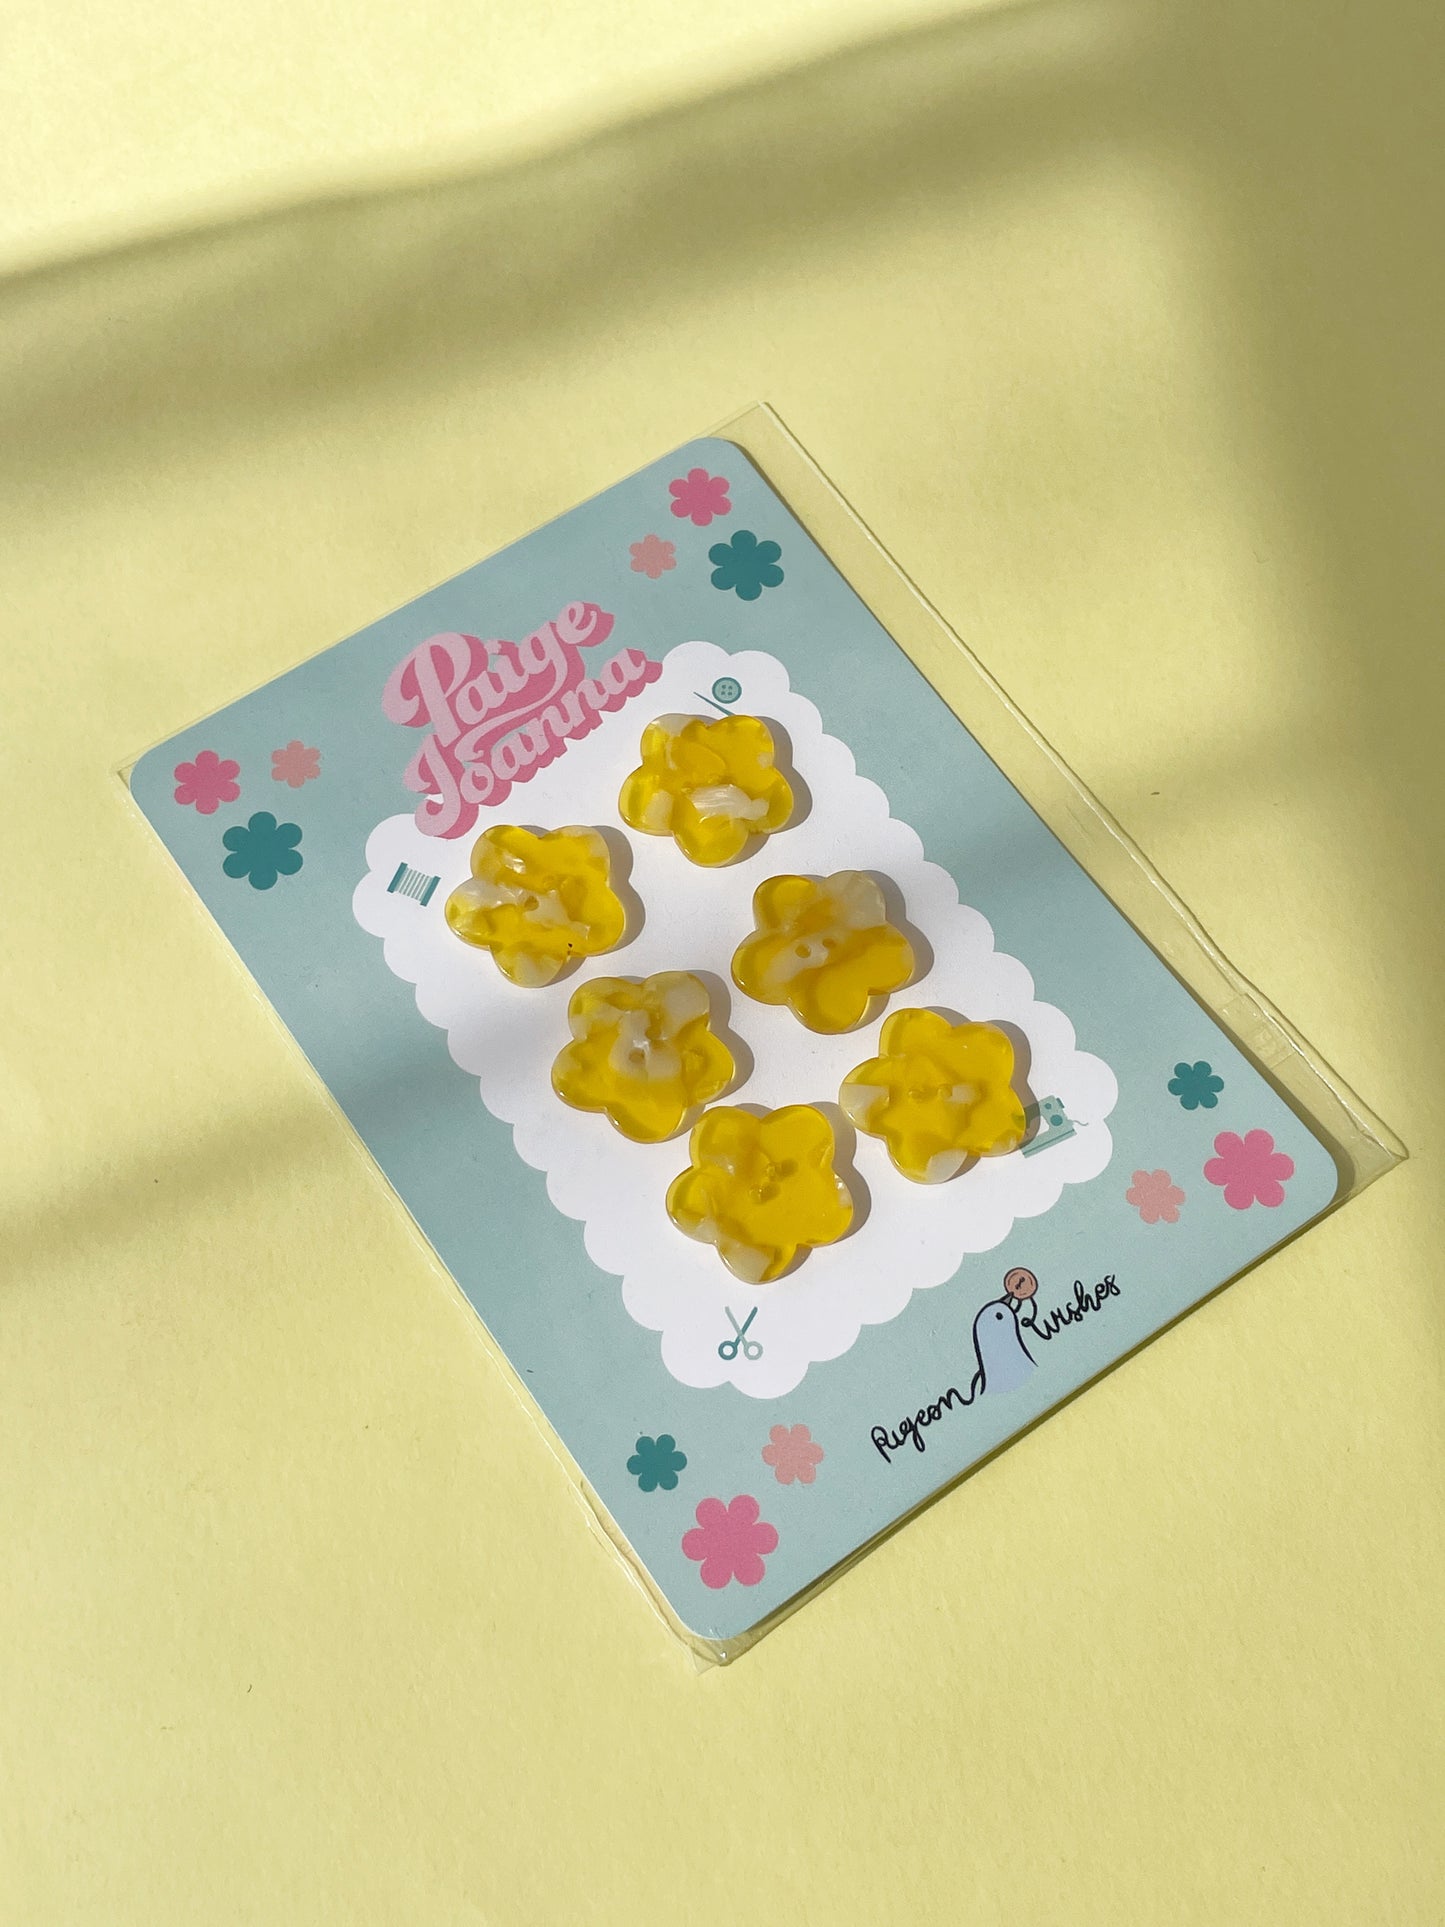 X6 Original Paige Joanna X Pigeon Wishes Yellow Flower Buttons | Buttercup Pack